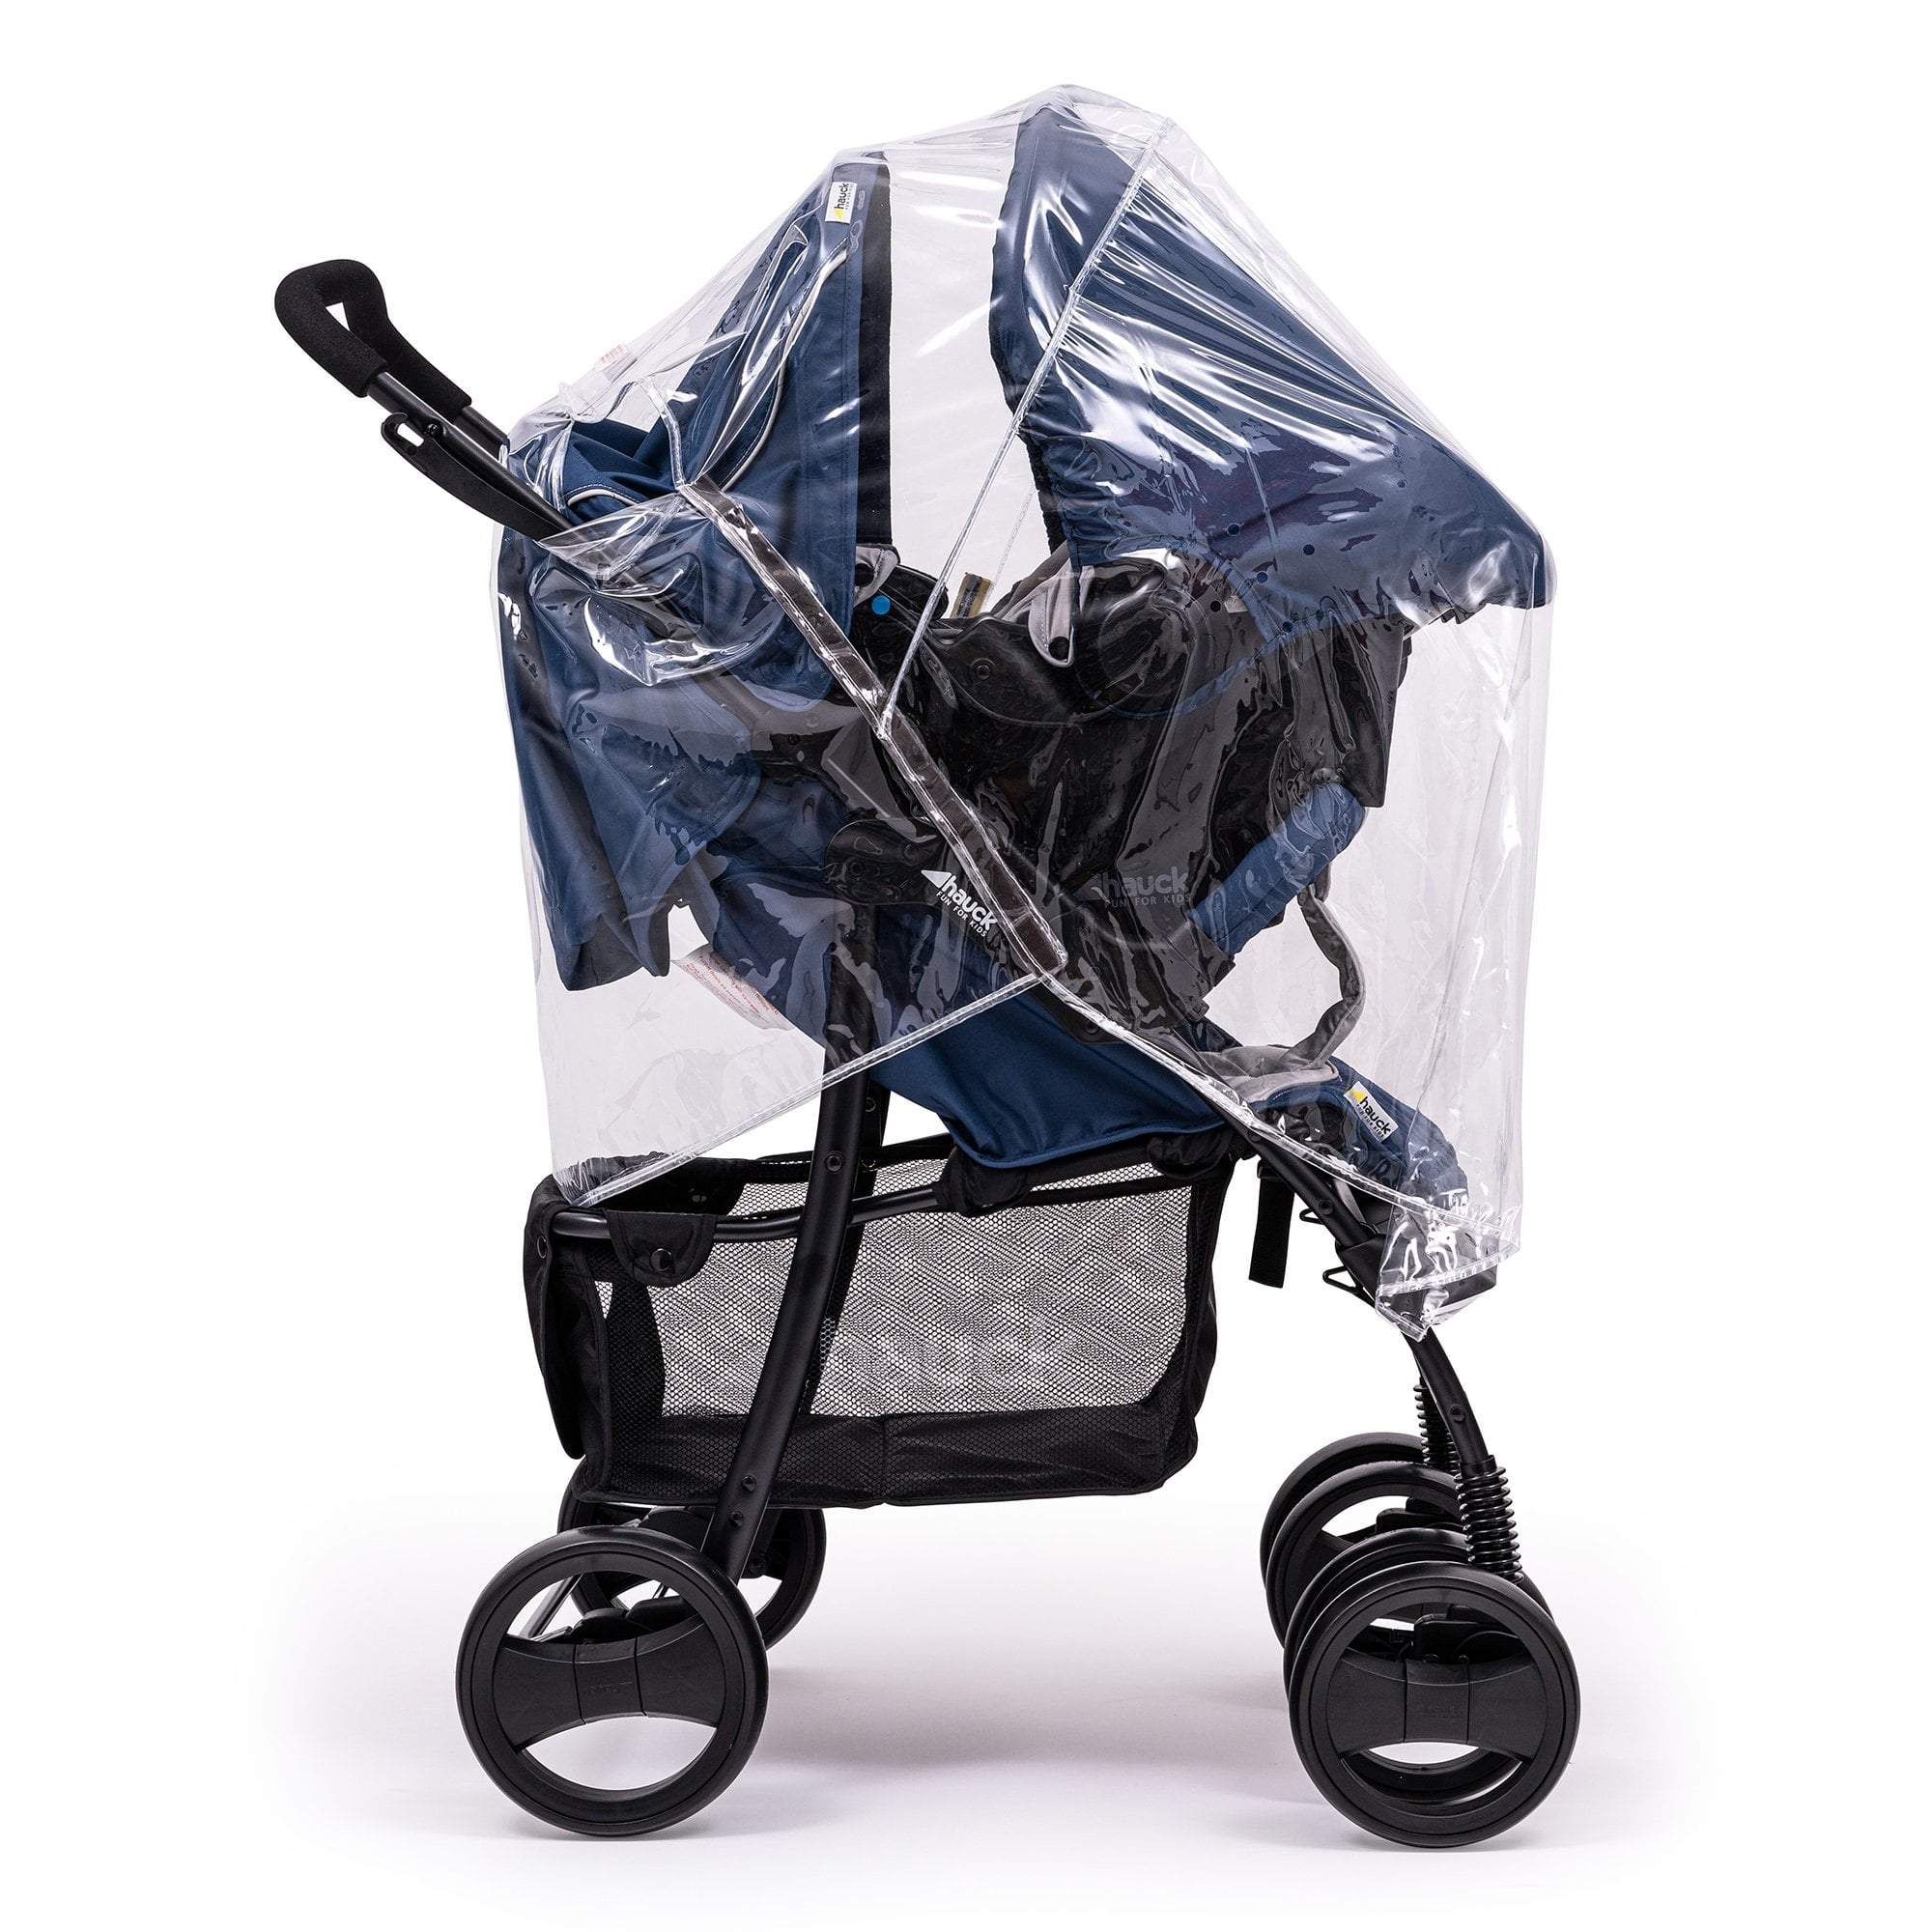 Travel System Raincover Compatible with Bebe 9 - Fits All Models - For Your Little One